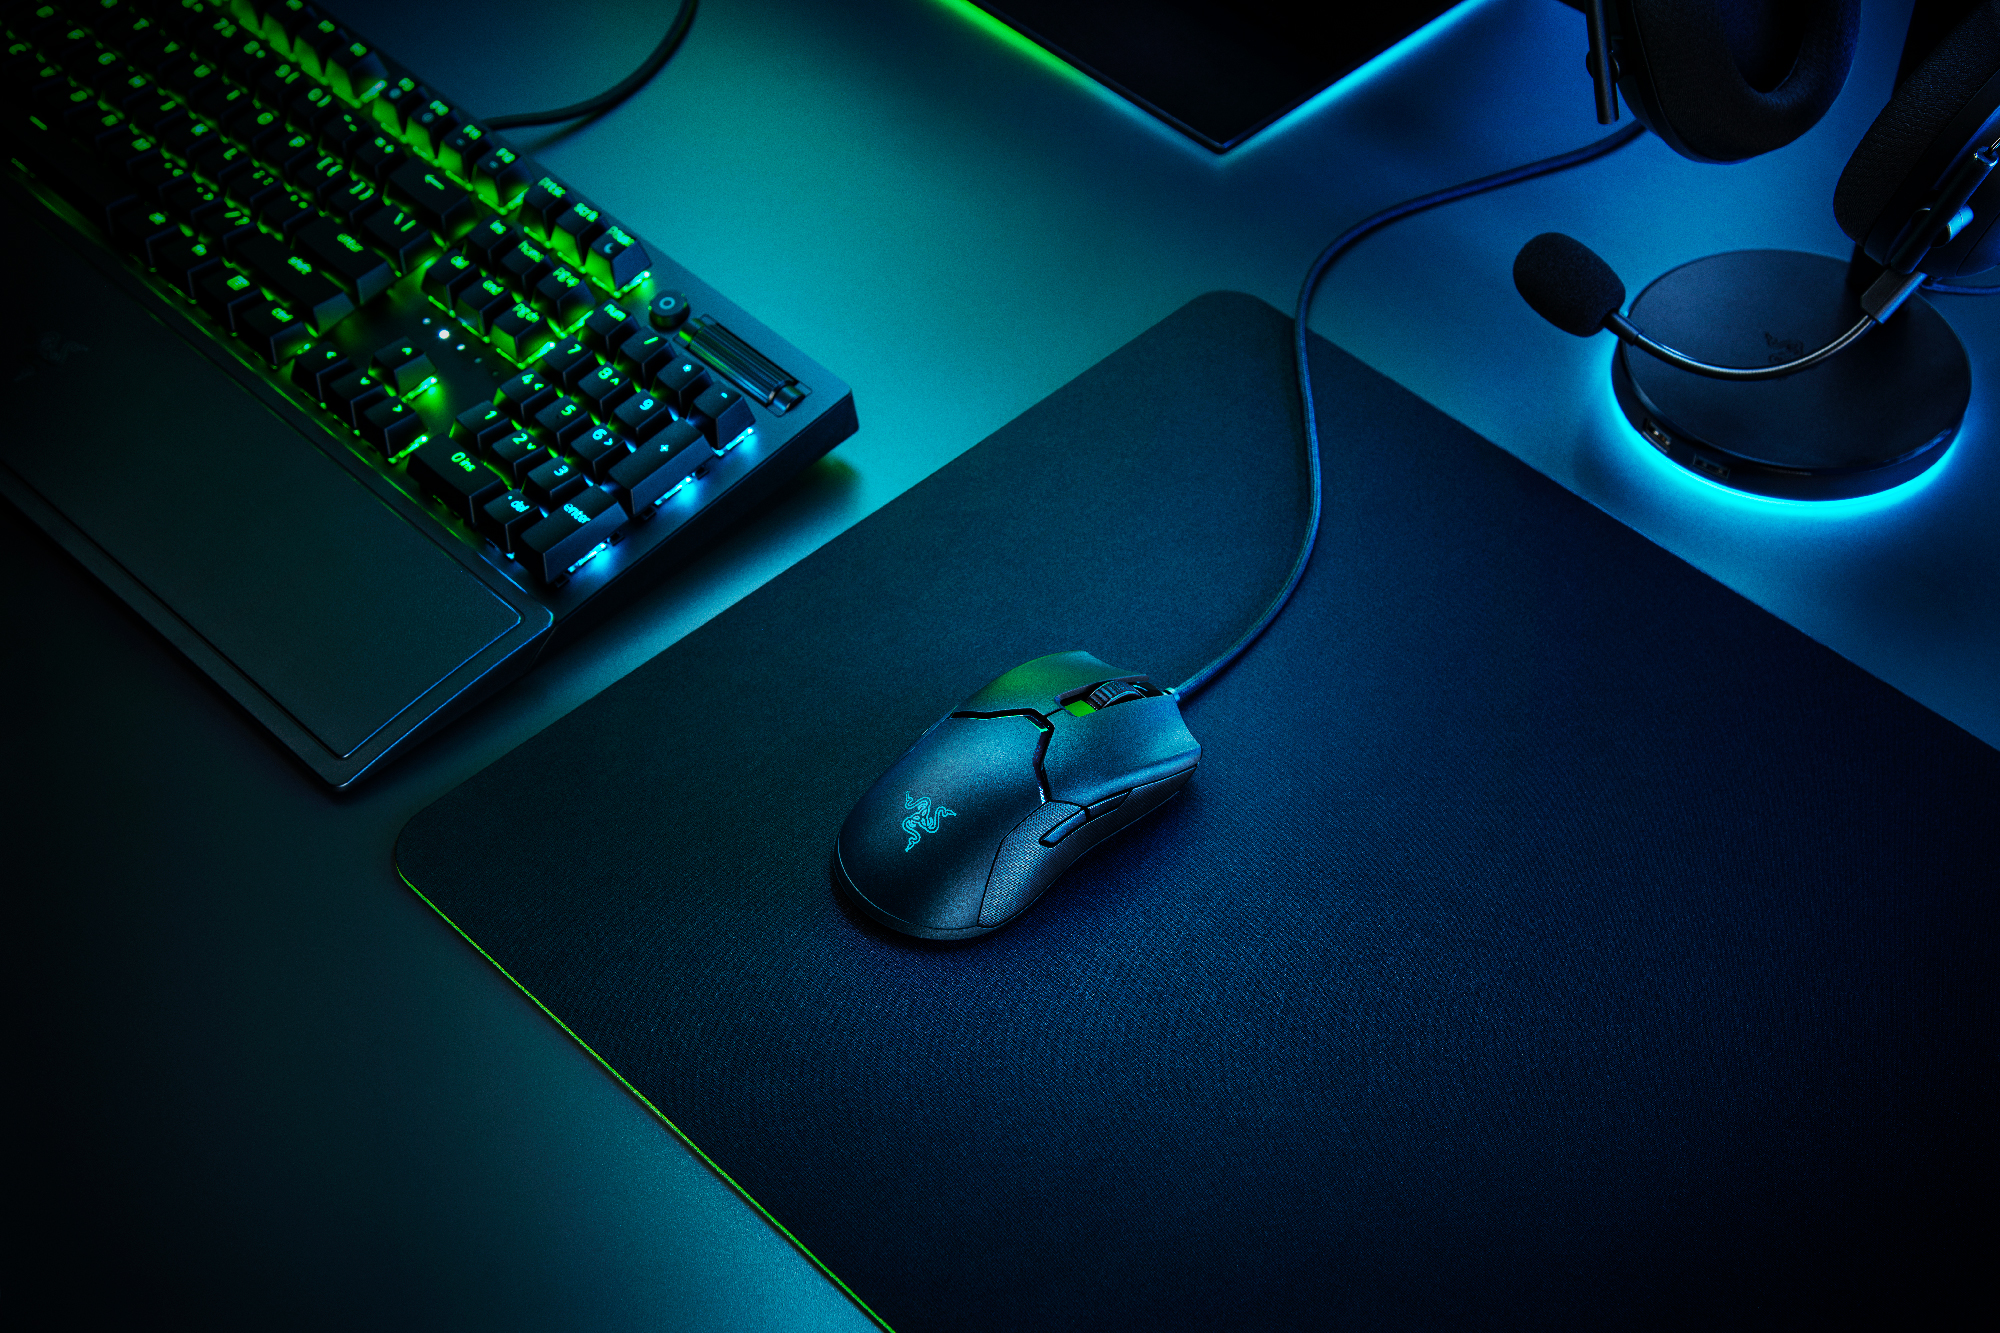 Razer’s Viper 8k gaming mouse pings your computer 8,000 times a second to fight lag